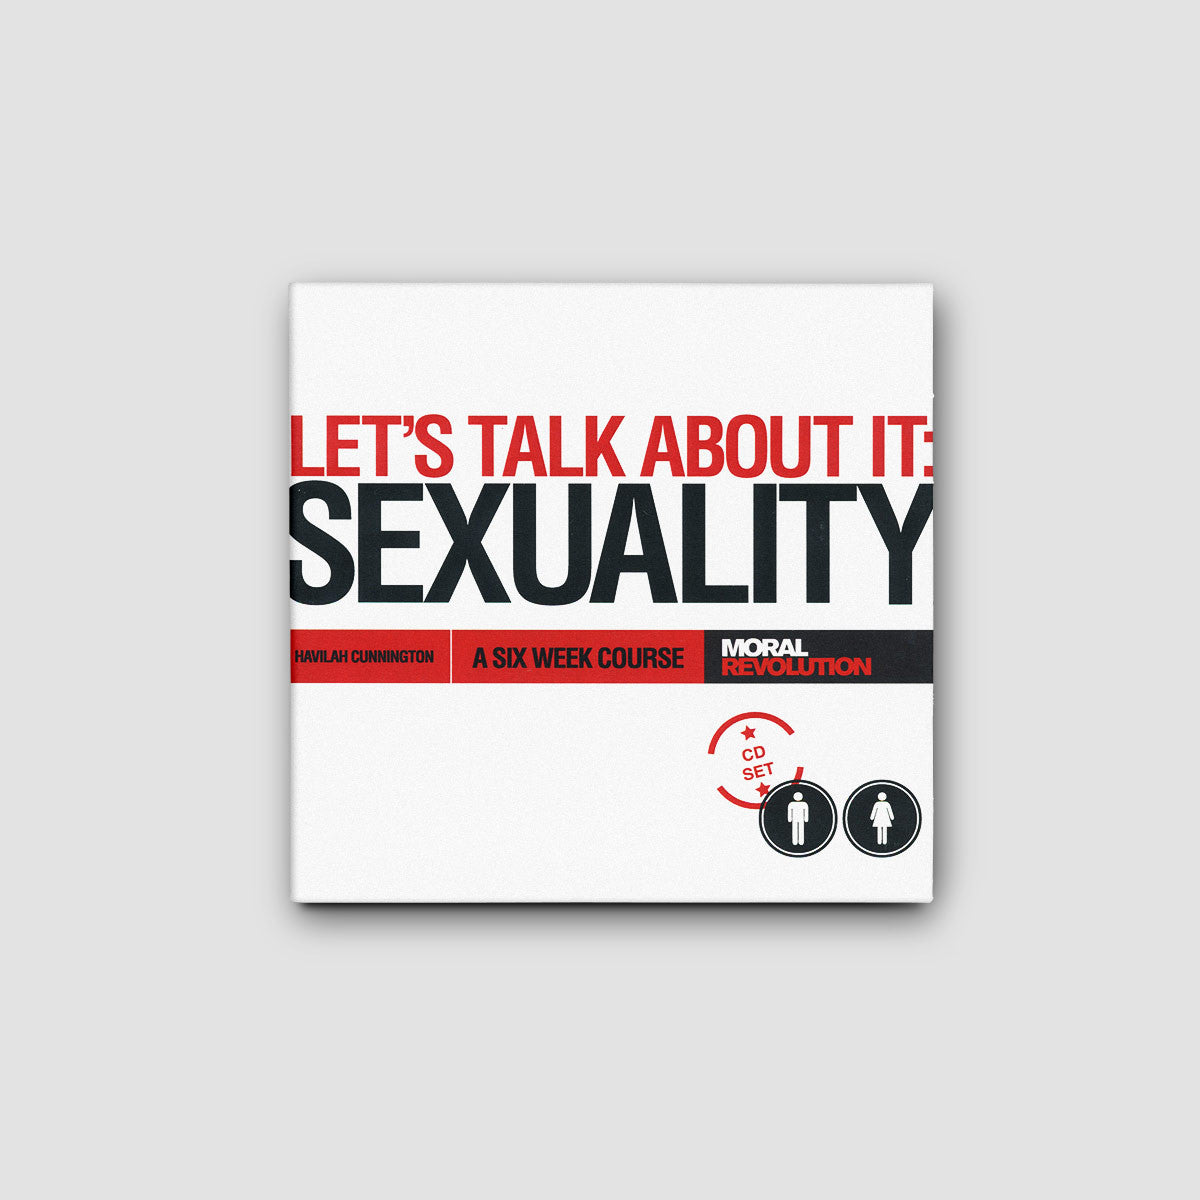 Let's Talk About It: Sexuality - 6 Week Course